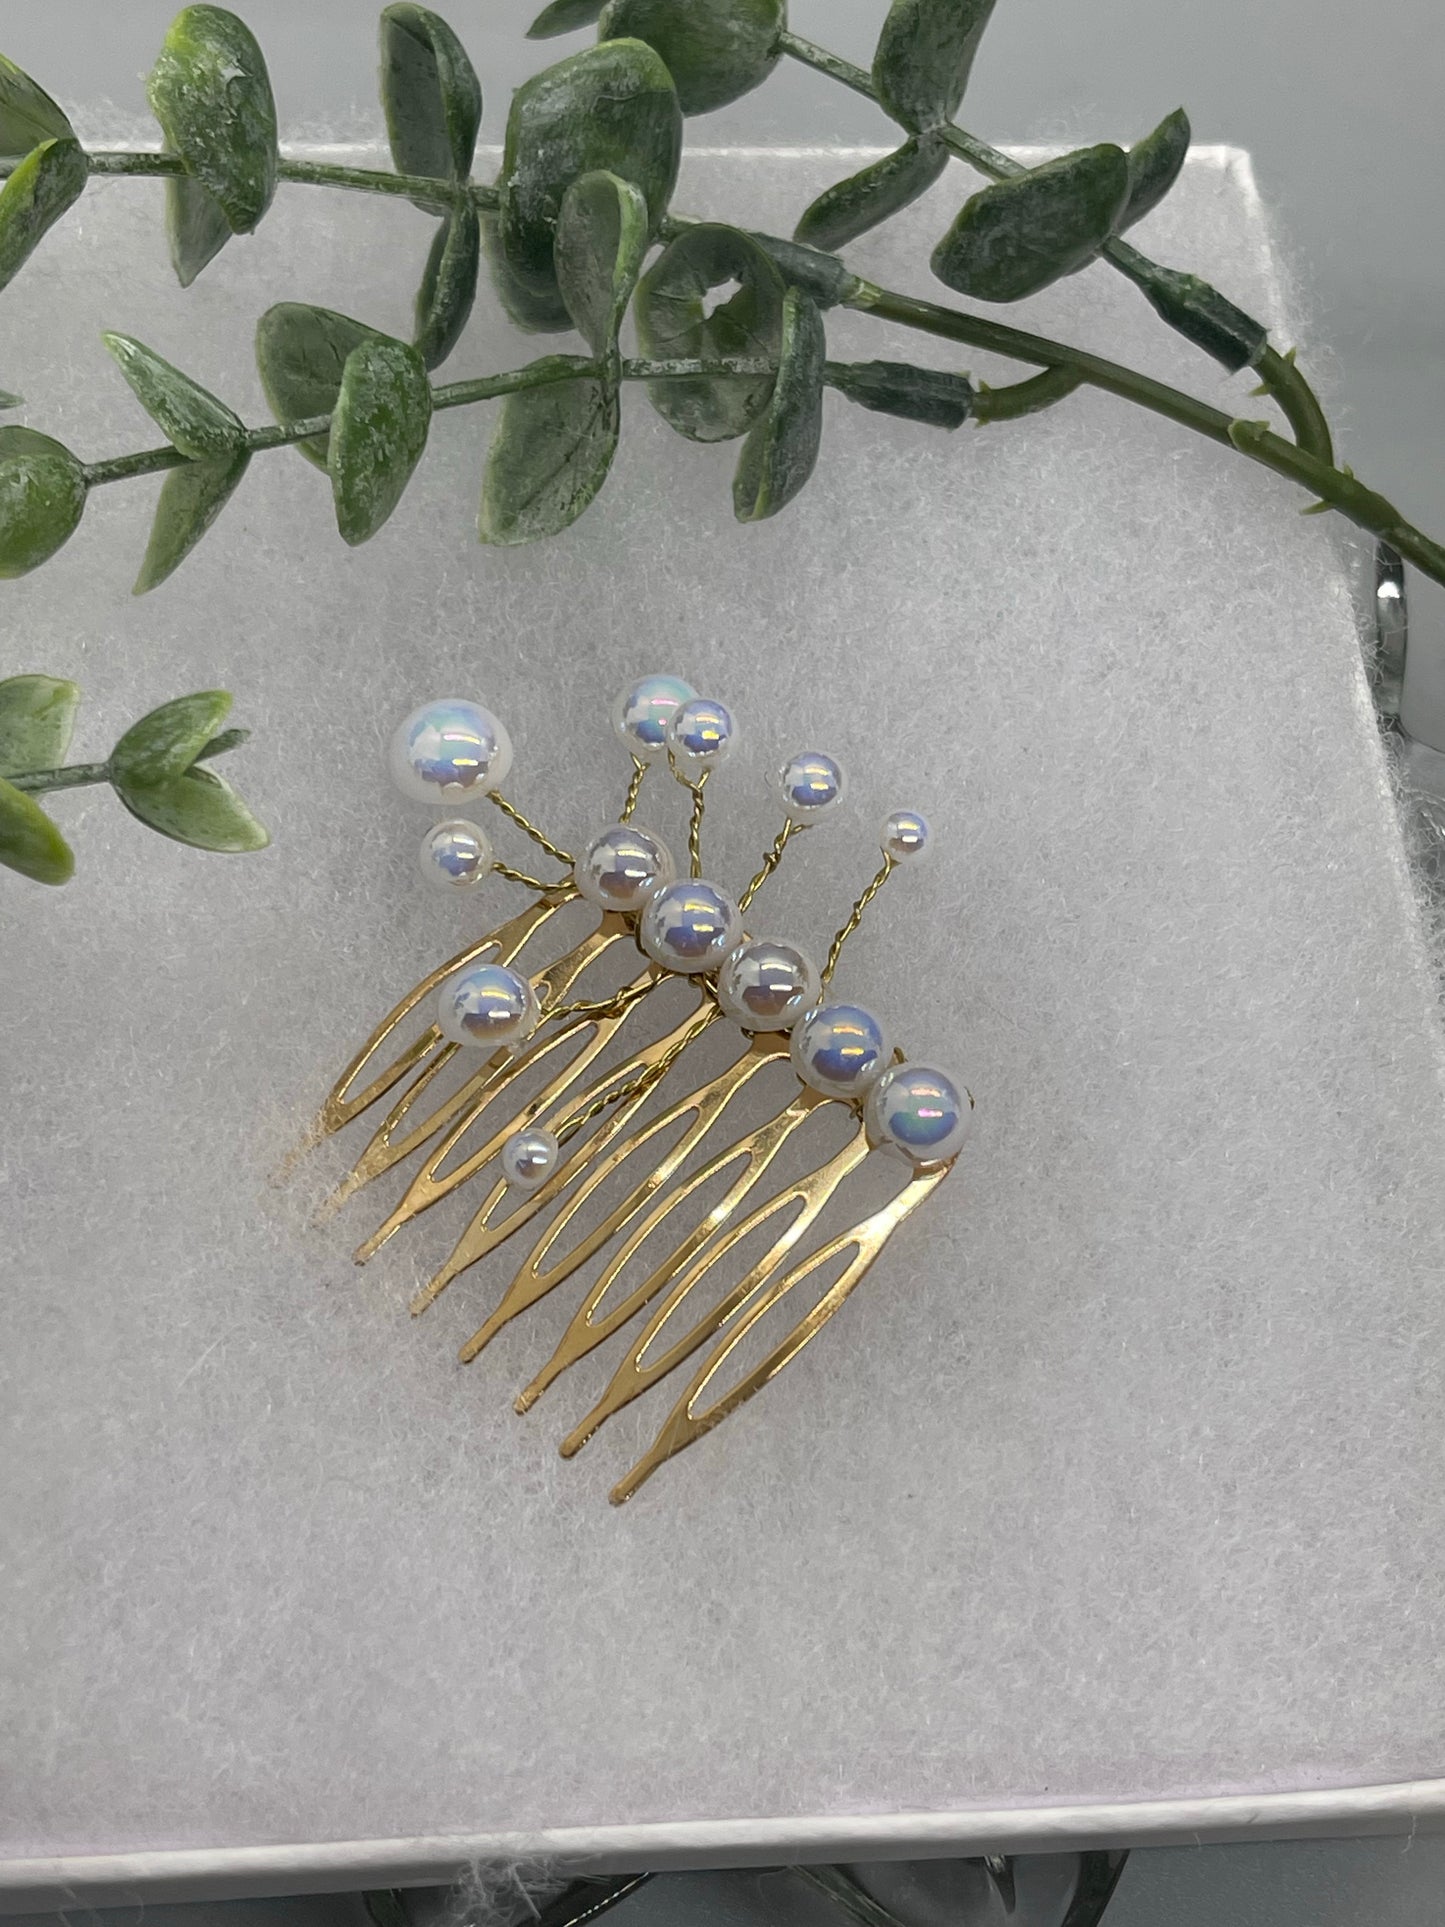 White Pearl small hair vine side comb approximately 2.0” side Comb Gold vintage style bridal Wedding shower